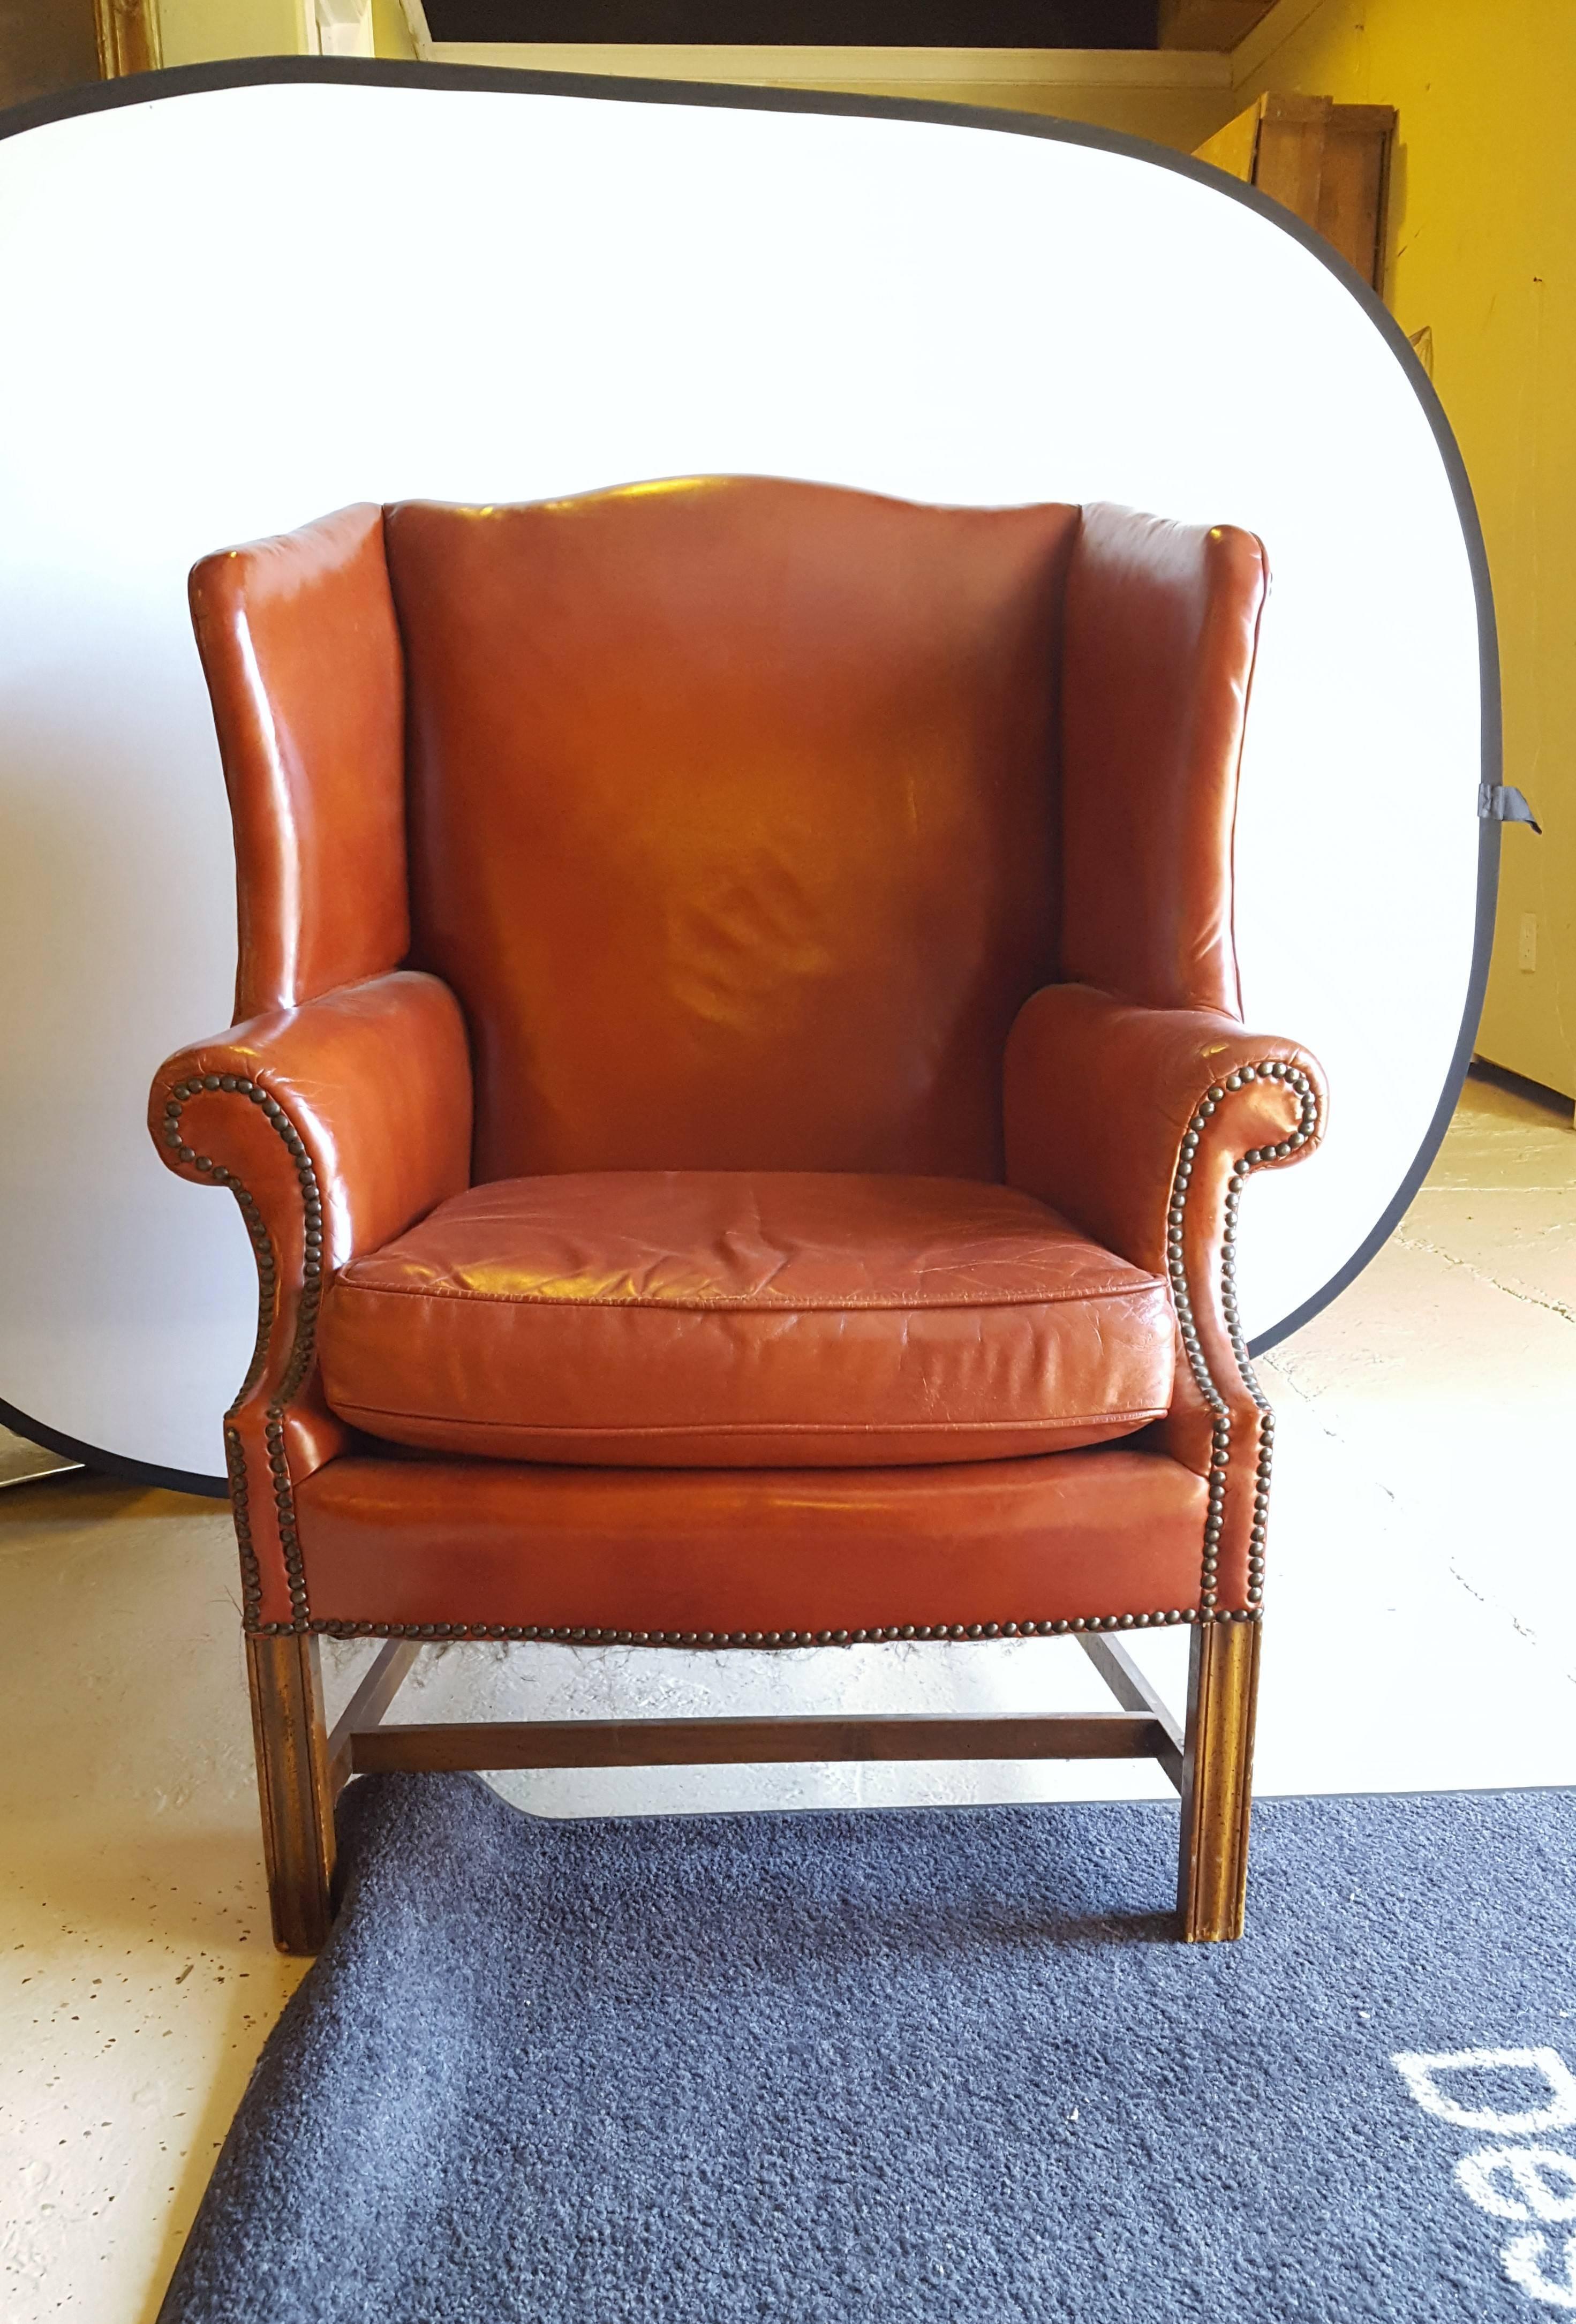 A Stately Traditional English Red Leather Wing Back Armchair With Nailhead Trim. Very comfortable large piece.